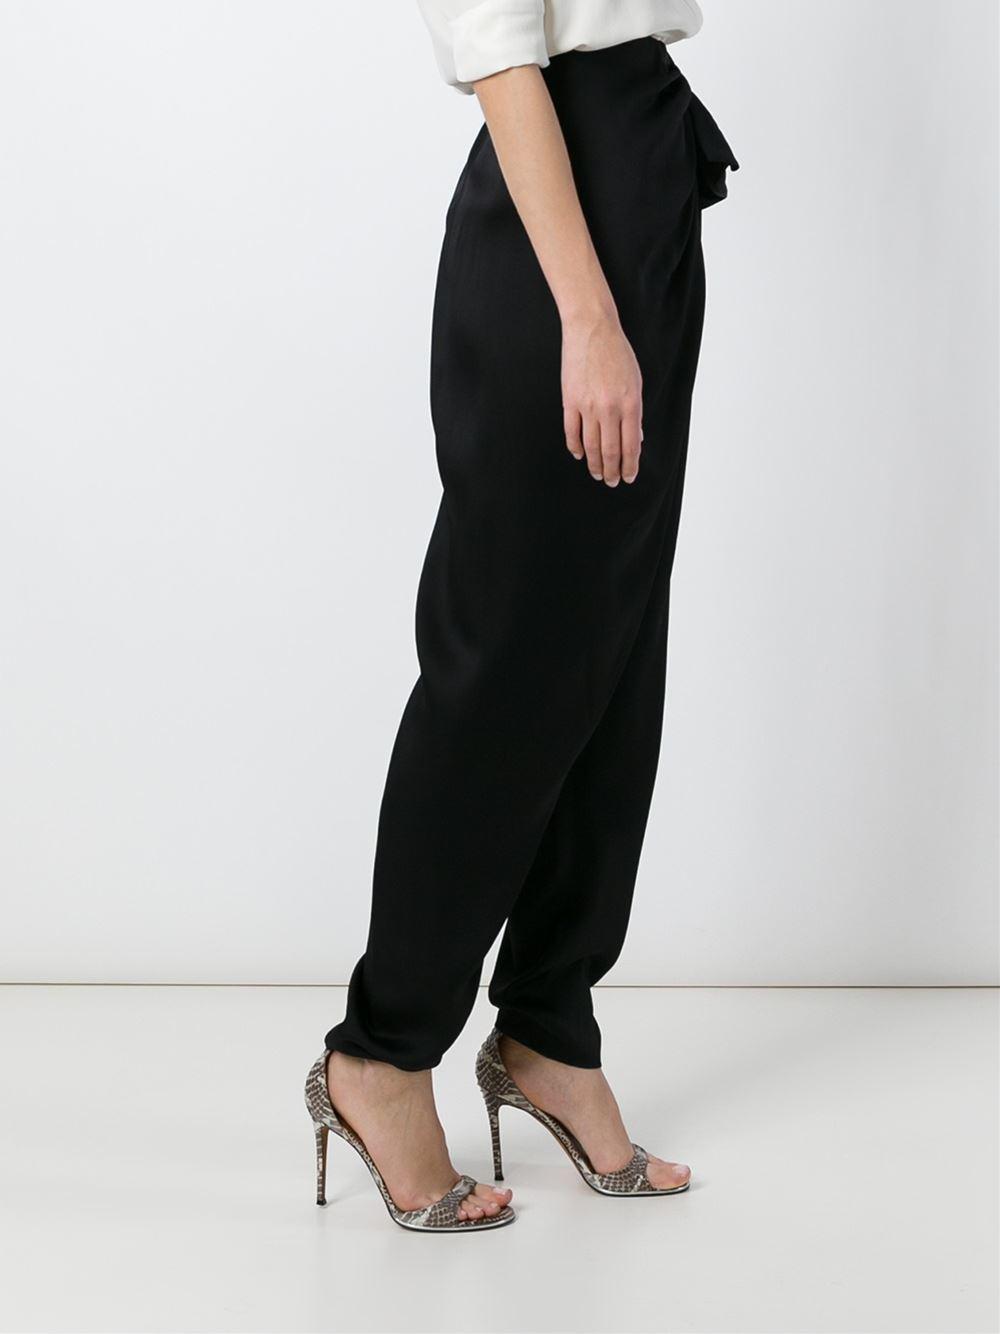 Lyst - Lanvin Tapered Draped Pants in Black